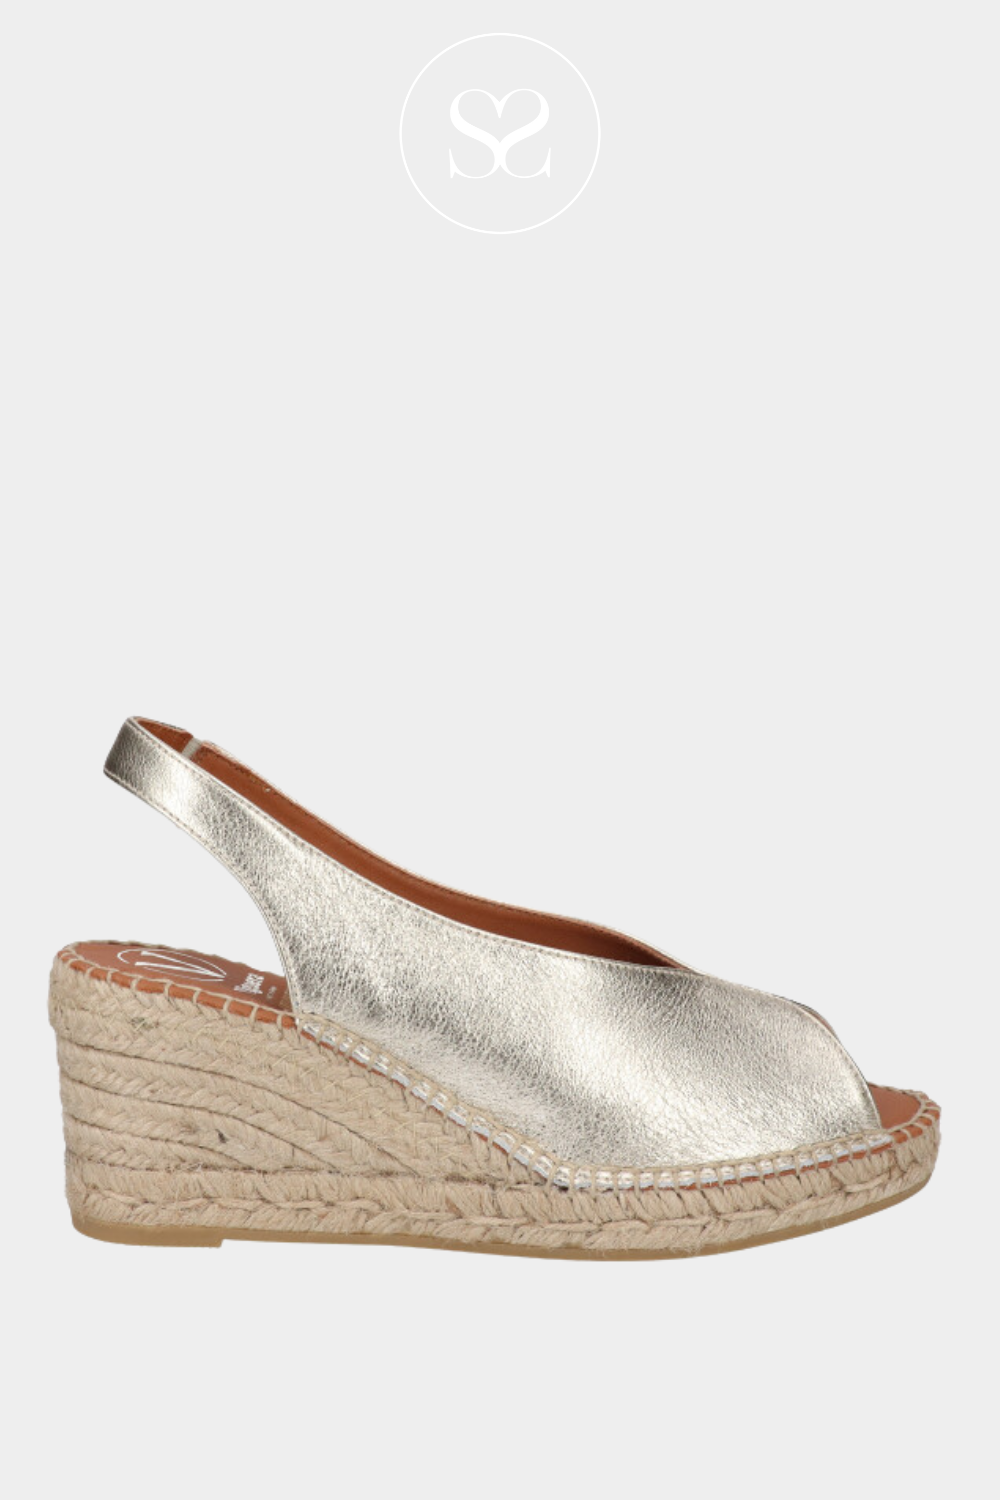 VIGUERA 2127 GOLD WEDGE ESPADRILLE SANDALS WITH ELASTICATED SLINGBACK STRAP AND V-CUT AND A PEEPTOE